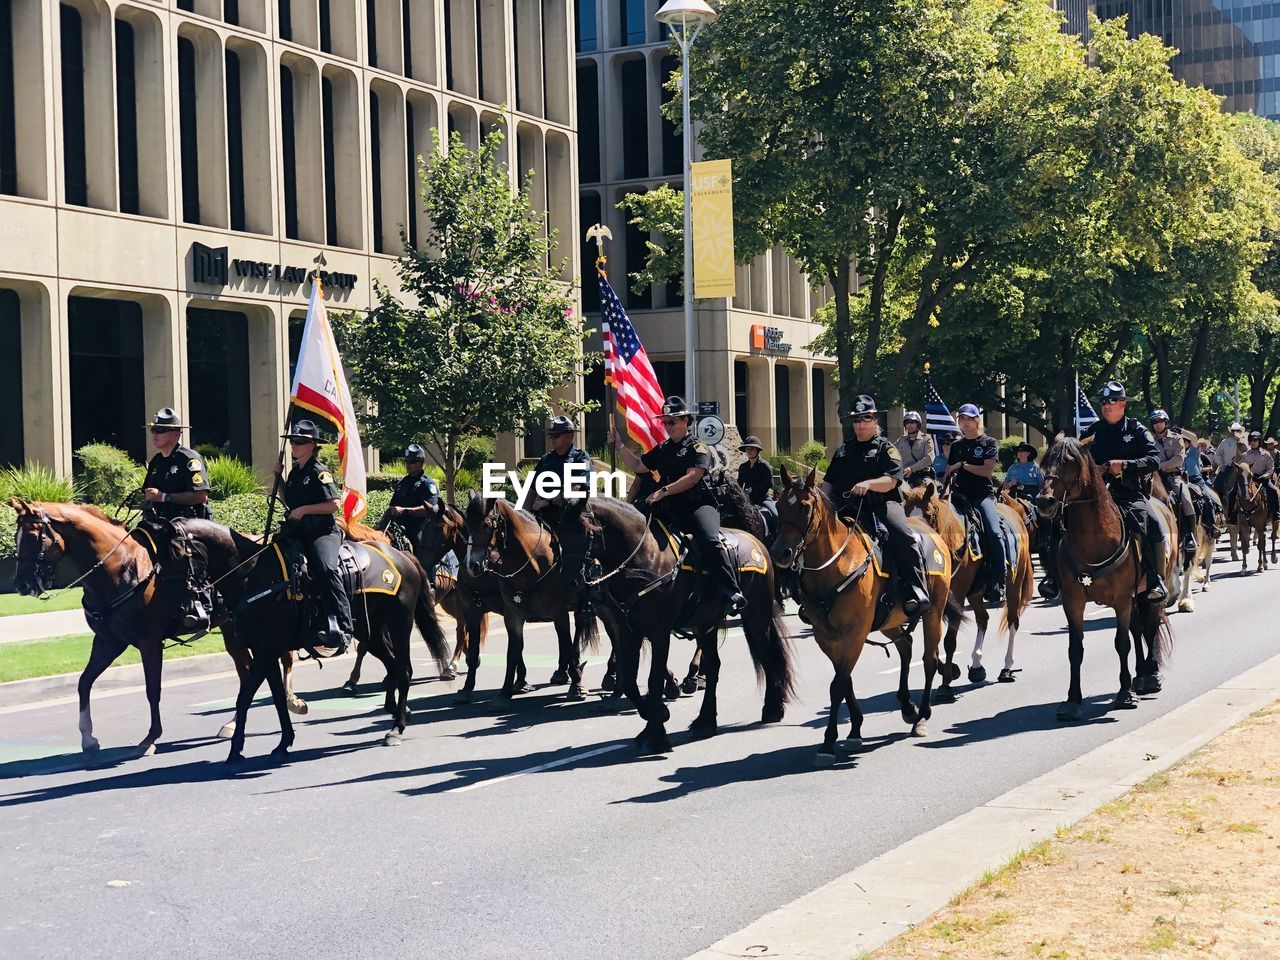 GROUP OF PEOPLE RIDING HORSES ON CITY STREET